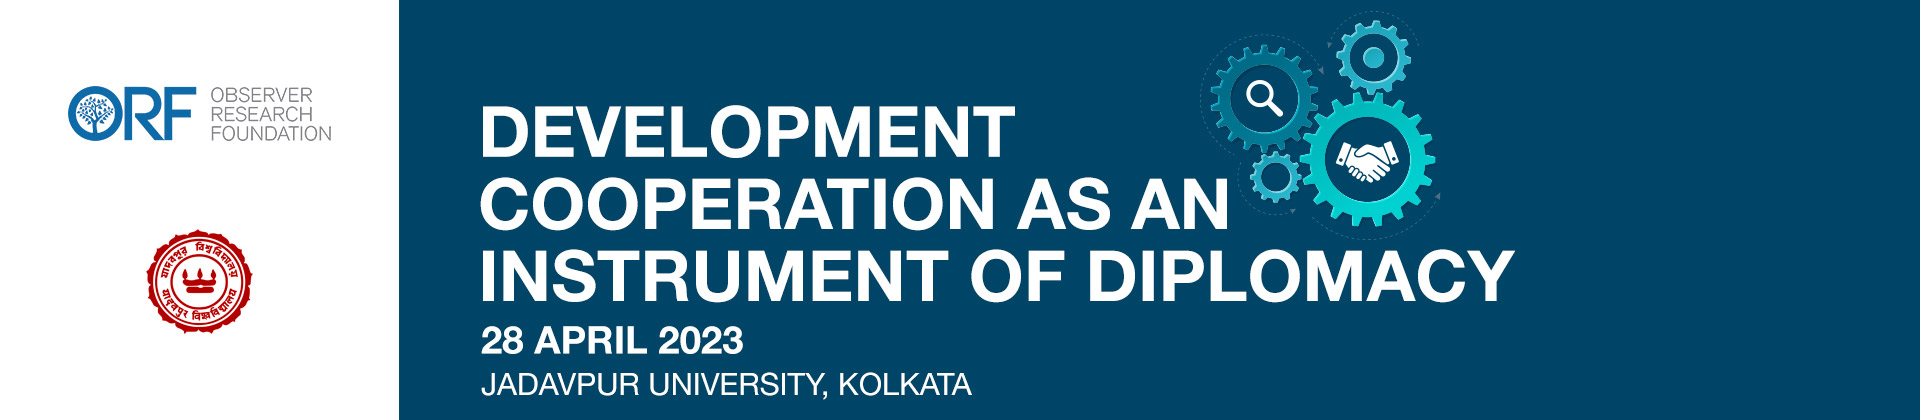 Development Cooperation as an Instrument of Diplomacy